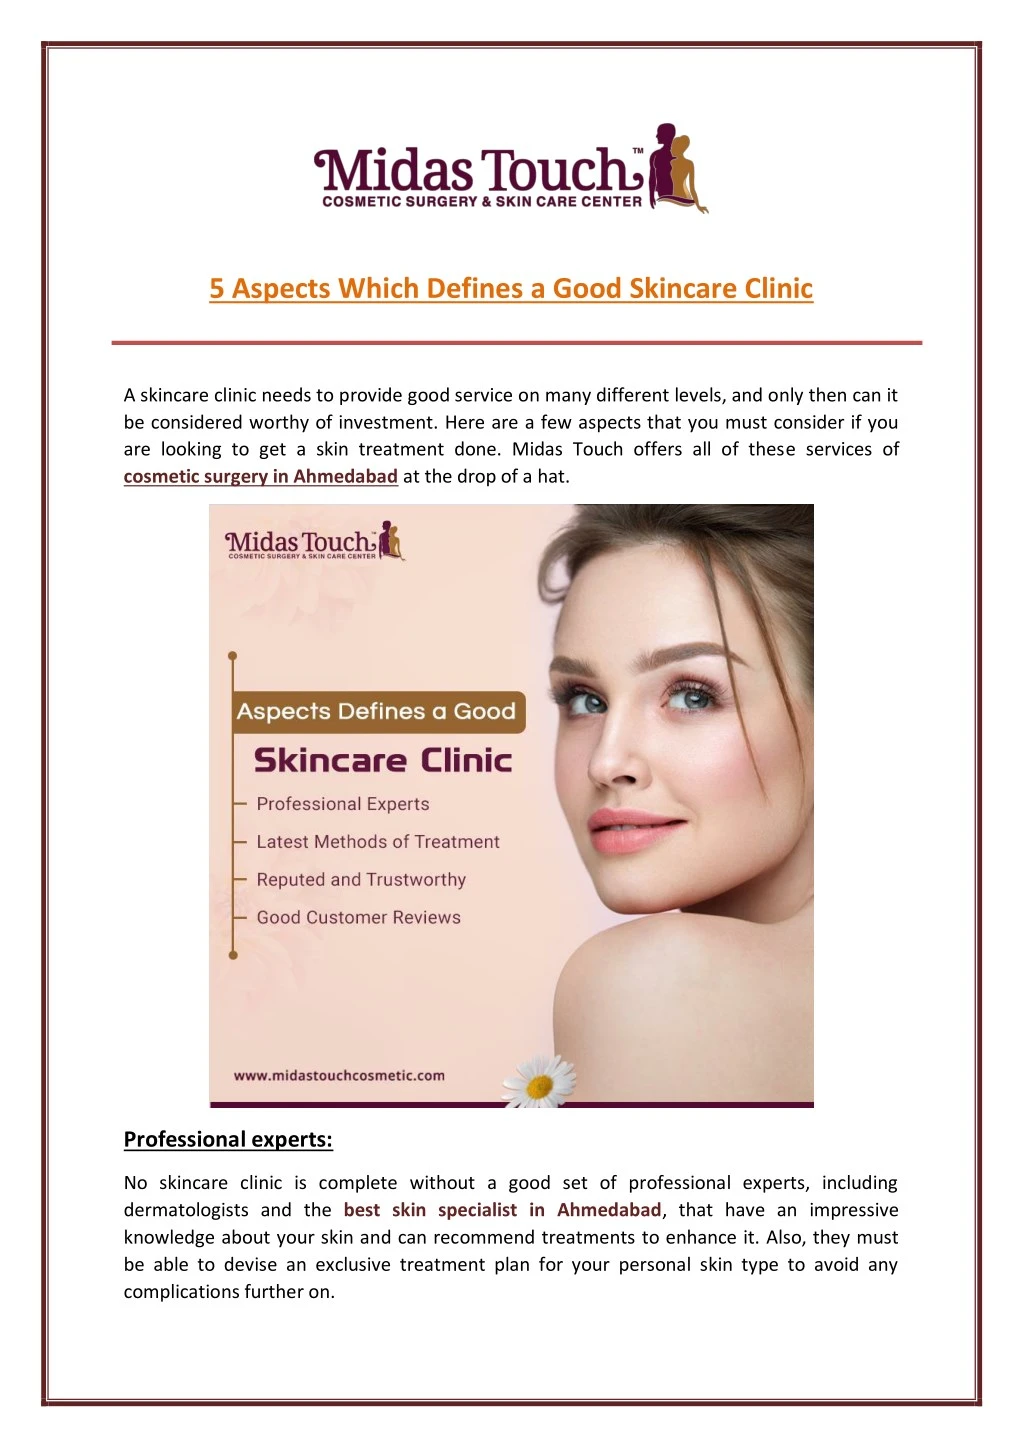 5 aspects which defines a good skincare clinic